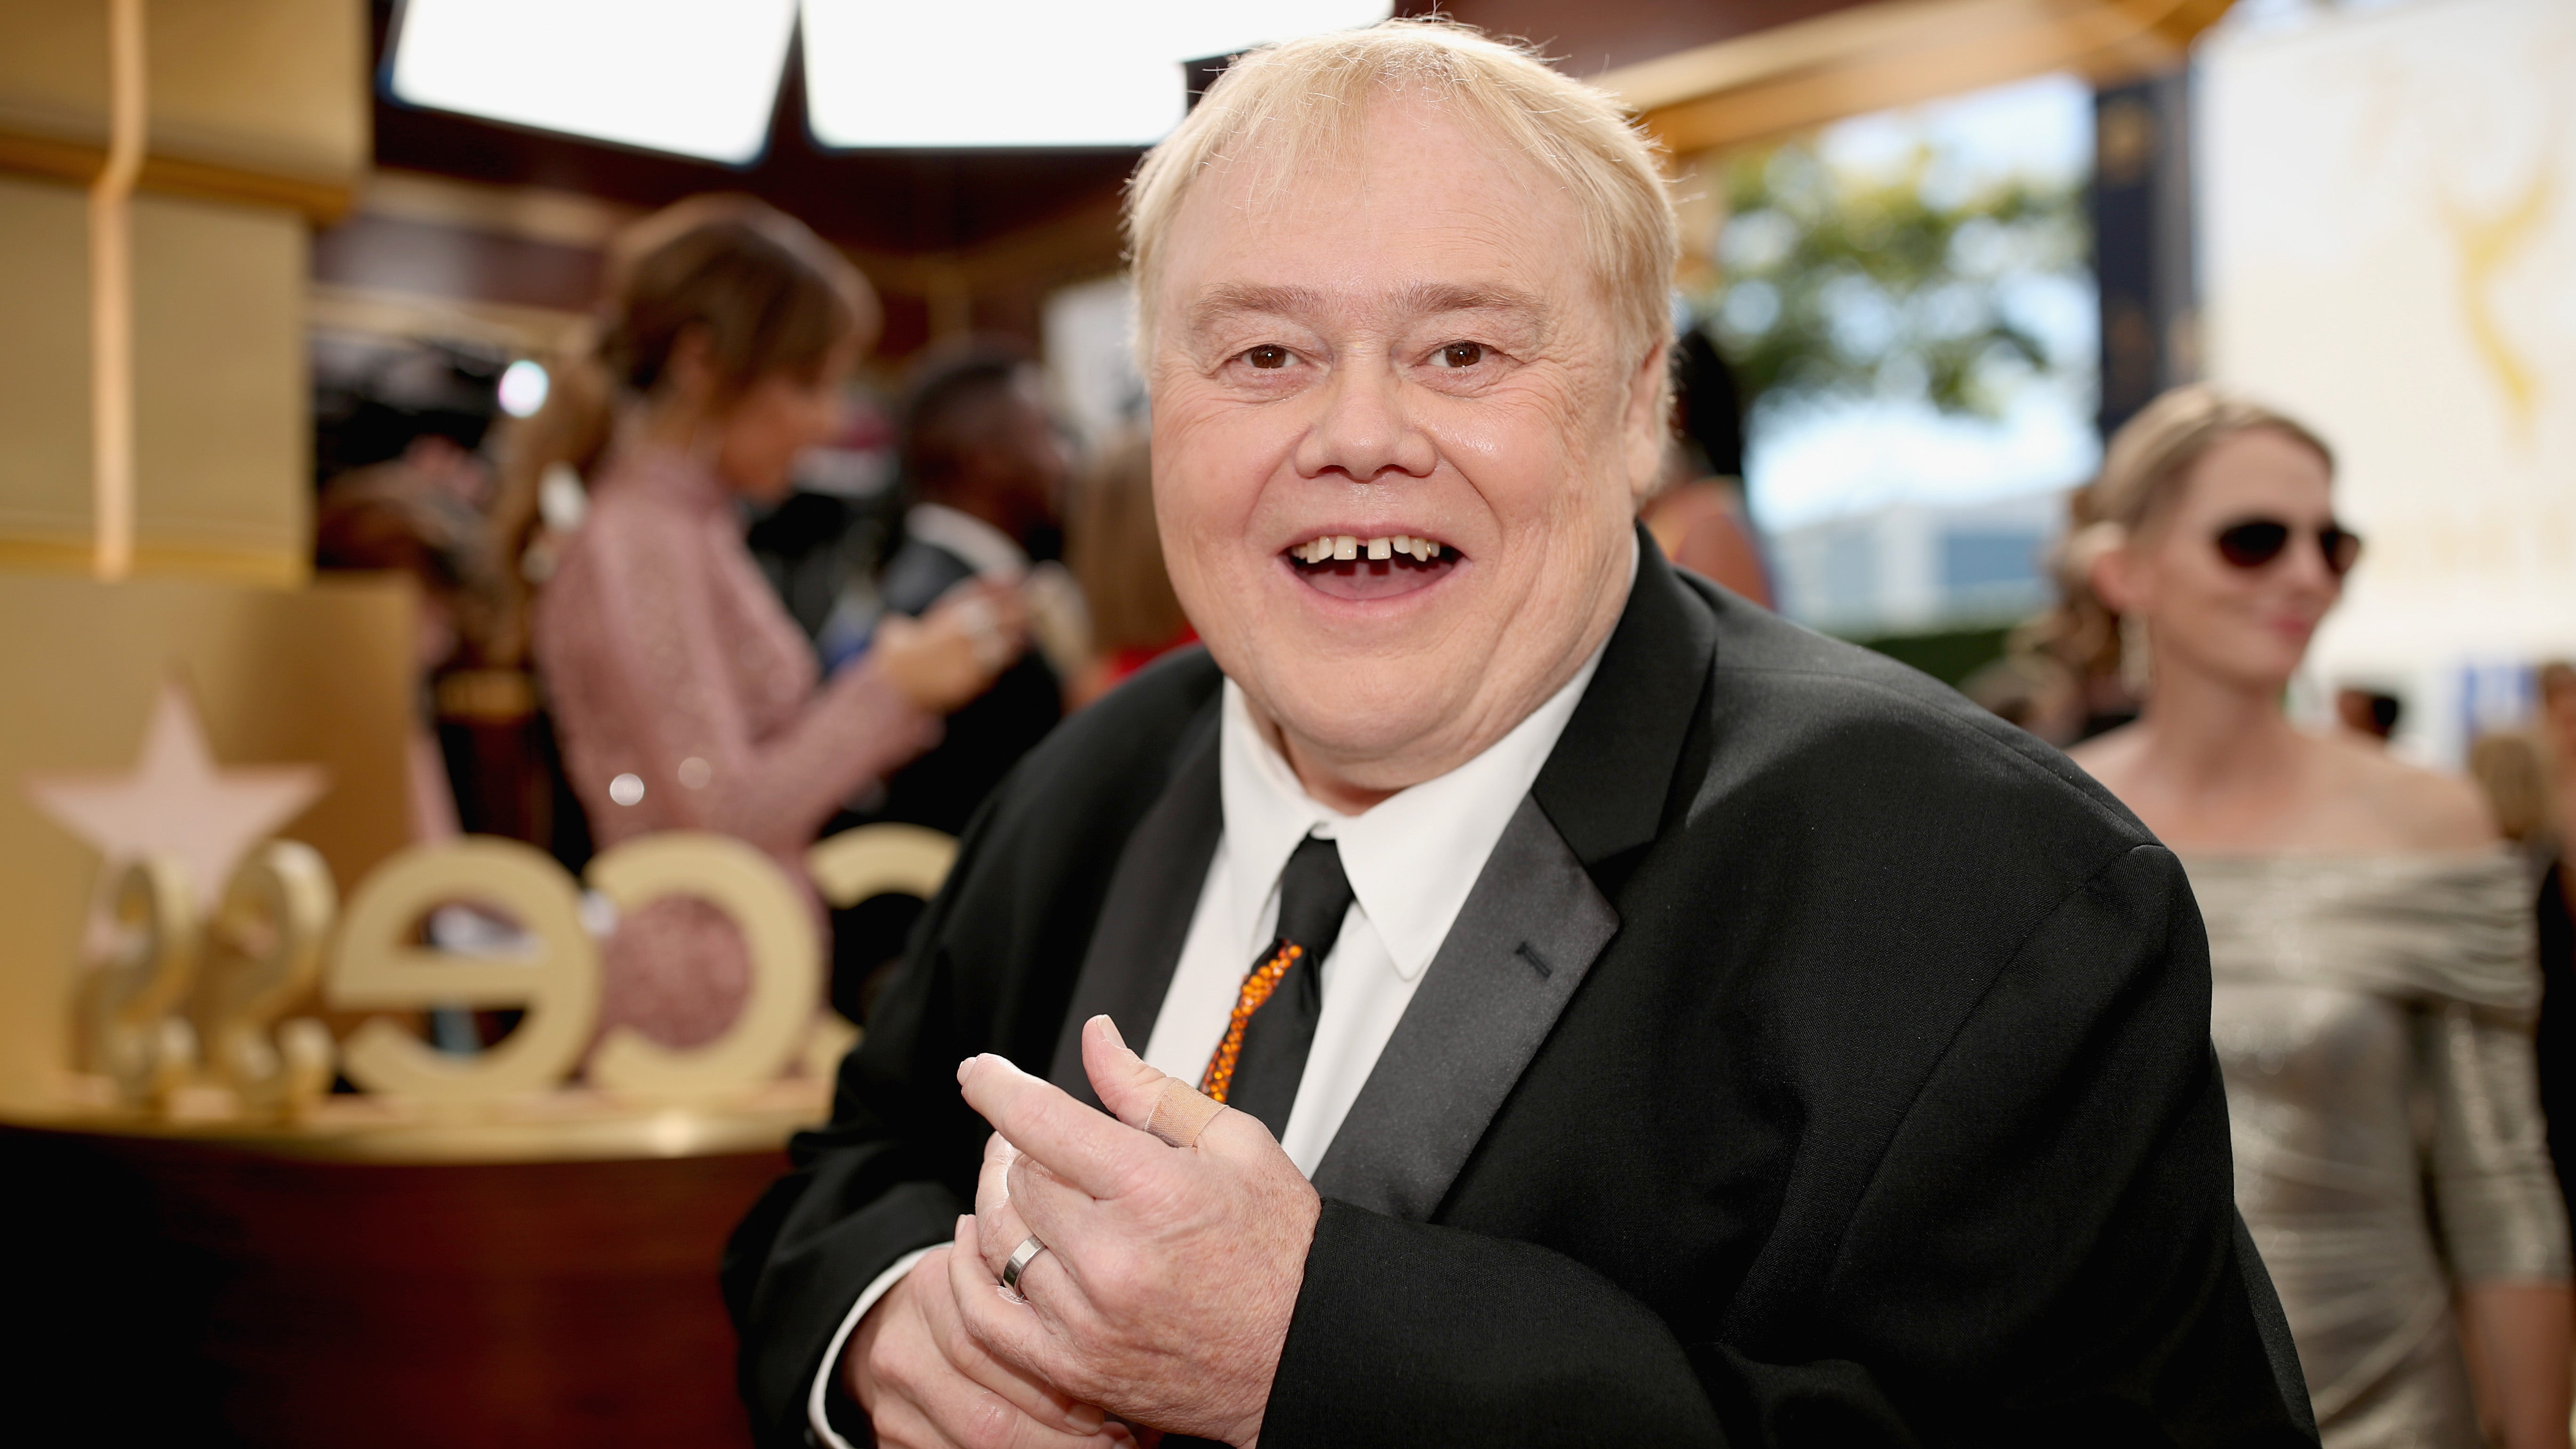 Comedian Louie Anderson is Dead at 68 After Battle with Blood